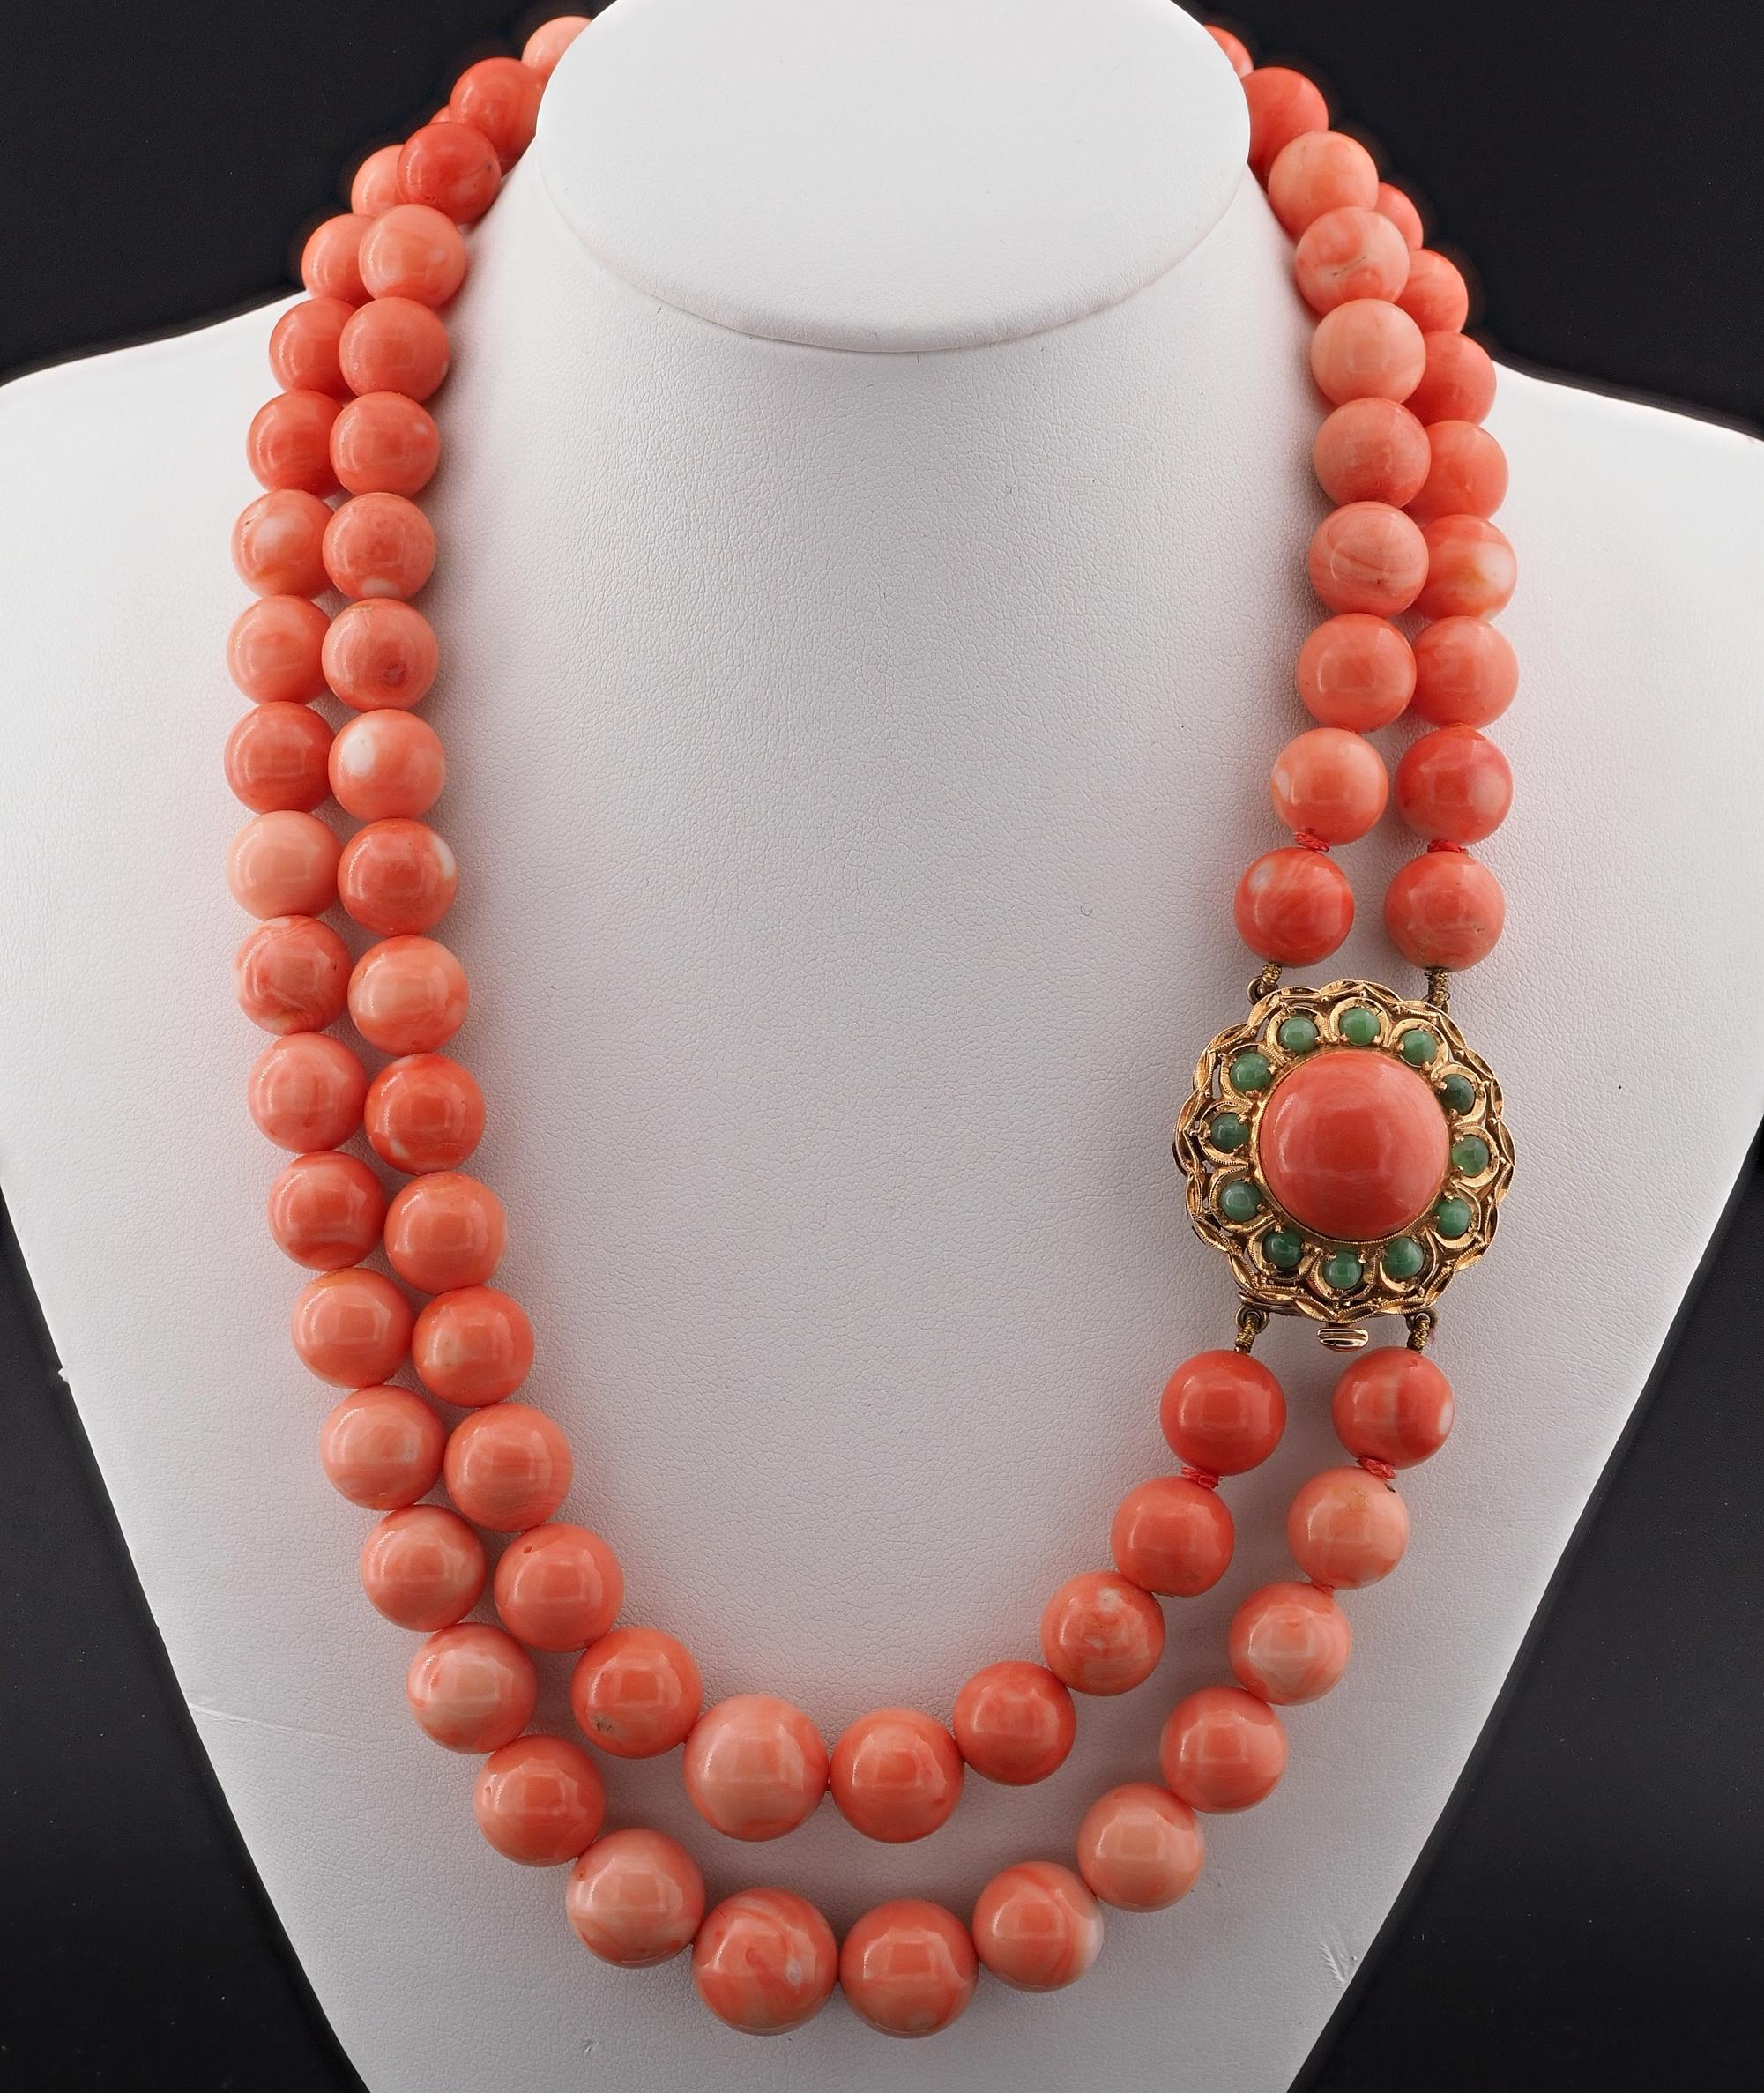 Rare Coral Beauty
This outstanding massive Coral necklace would fit a queen! Beautiful quality mid-century age, full of charm, natural untreated, no dye, no wax filling, 1960 ca, Italian origin
Weighs 173 grams!
The necklace is composed by two